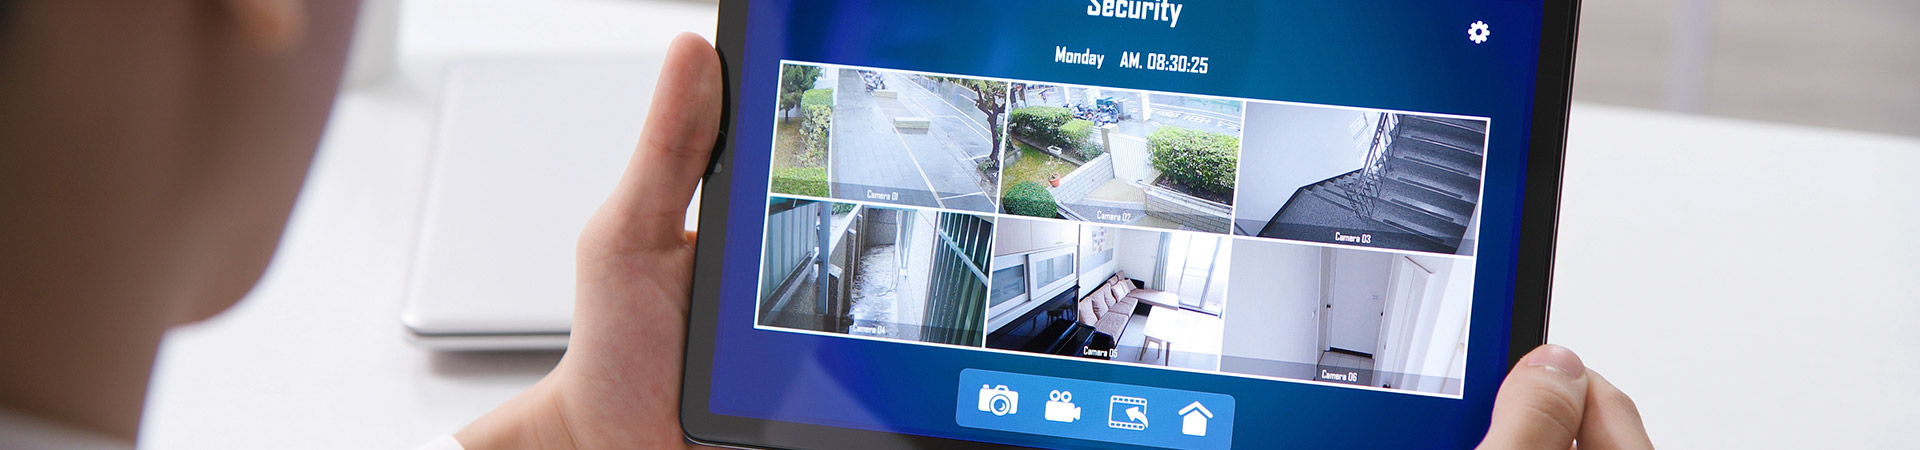 Home security cameras viewed